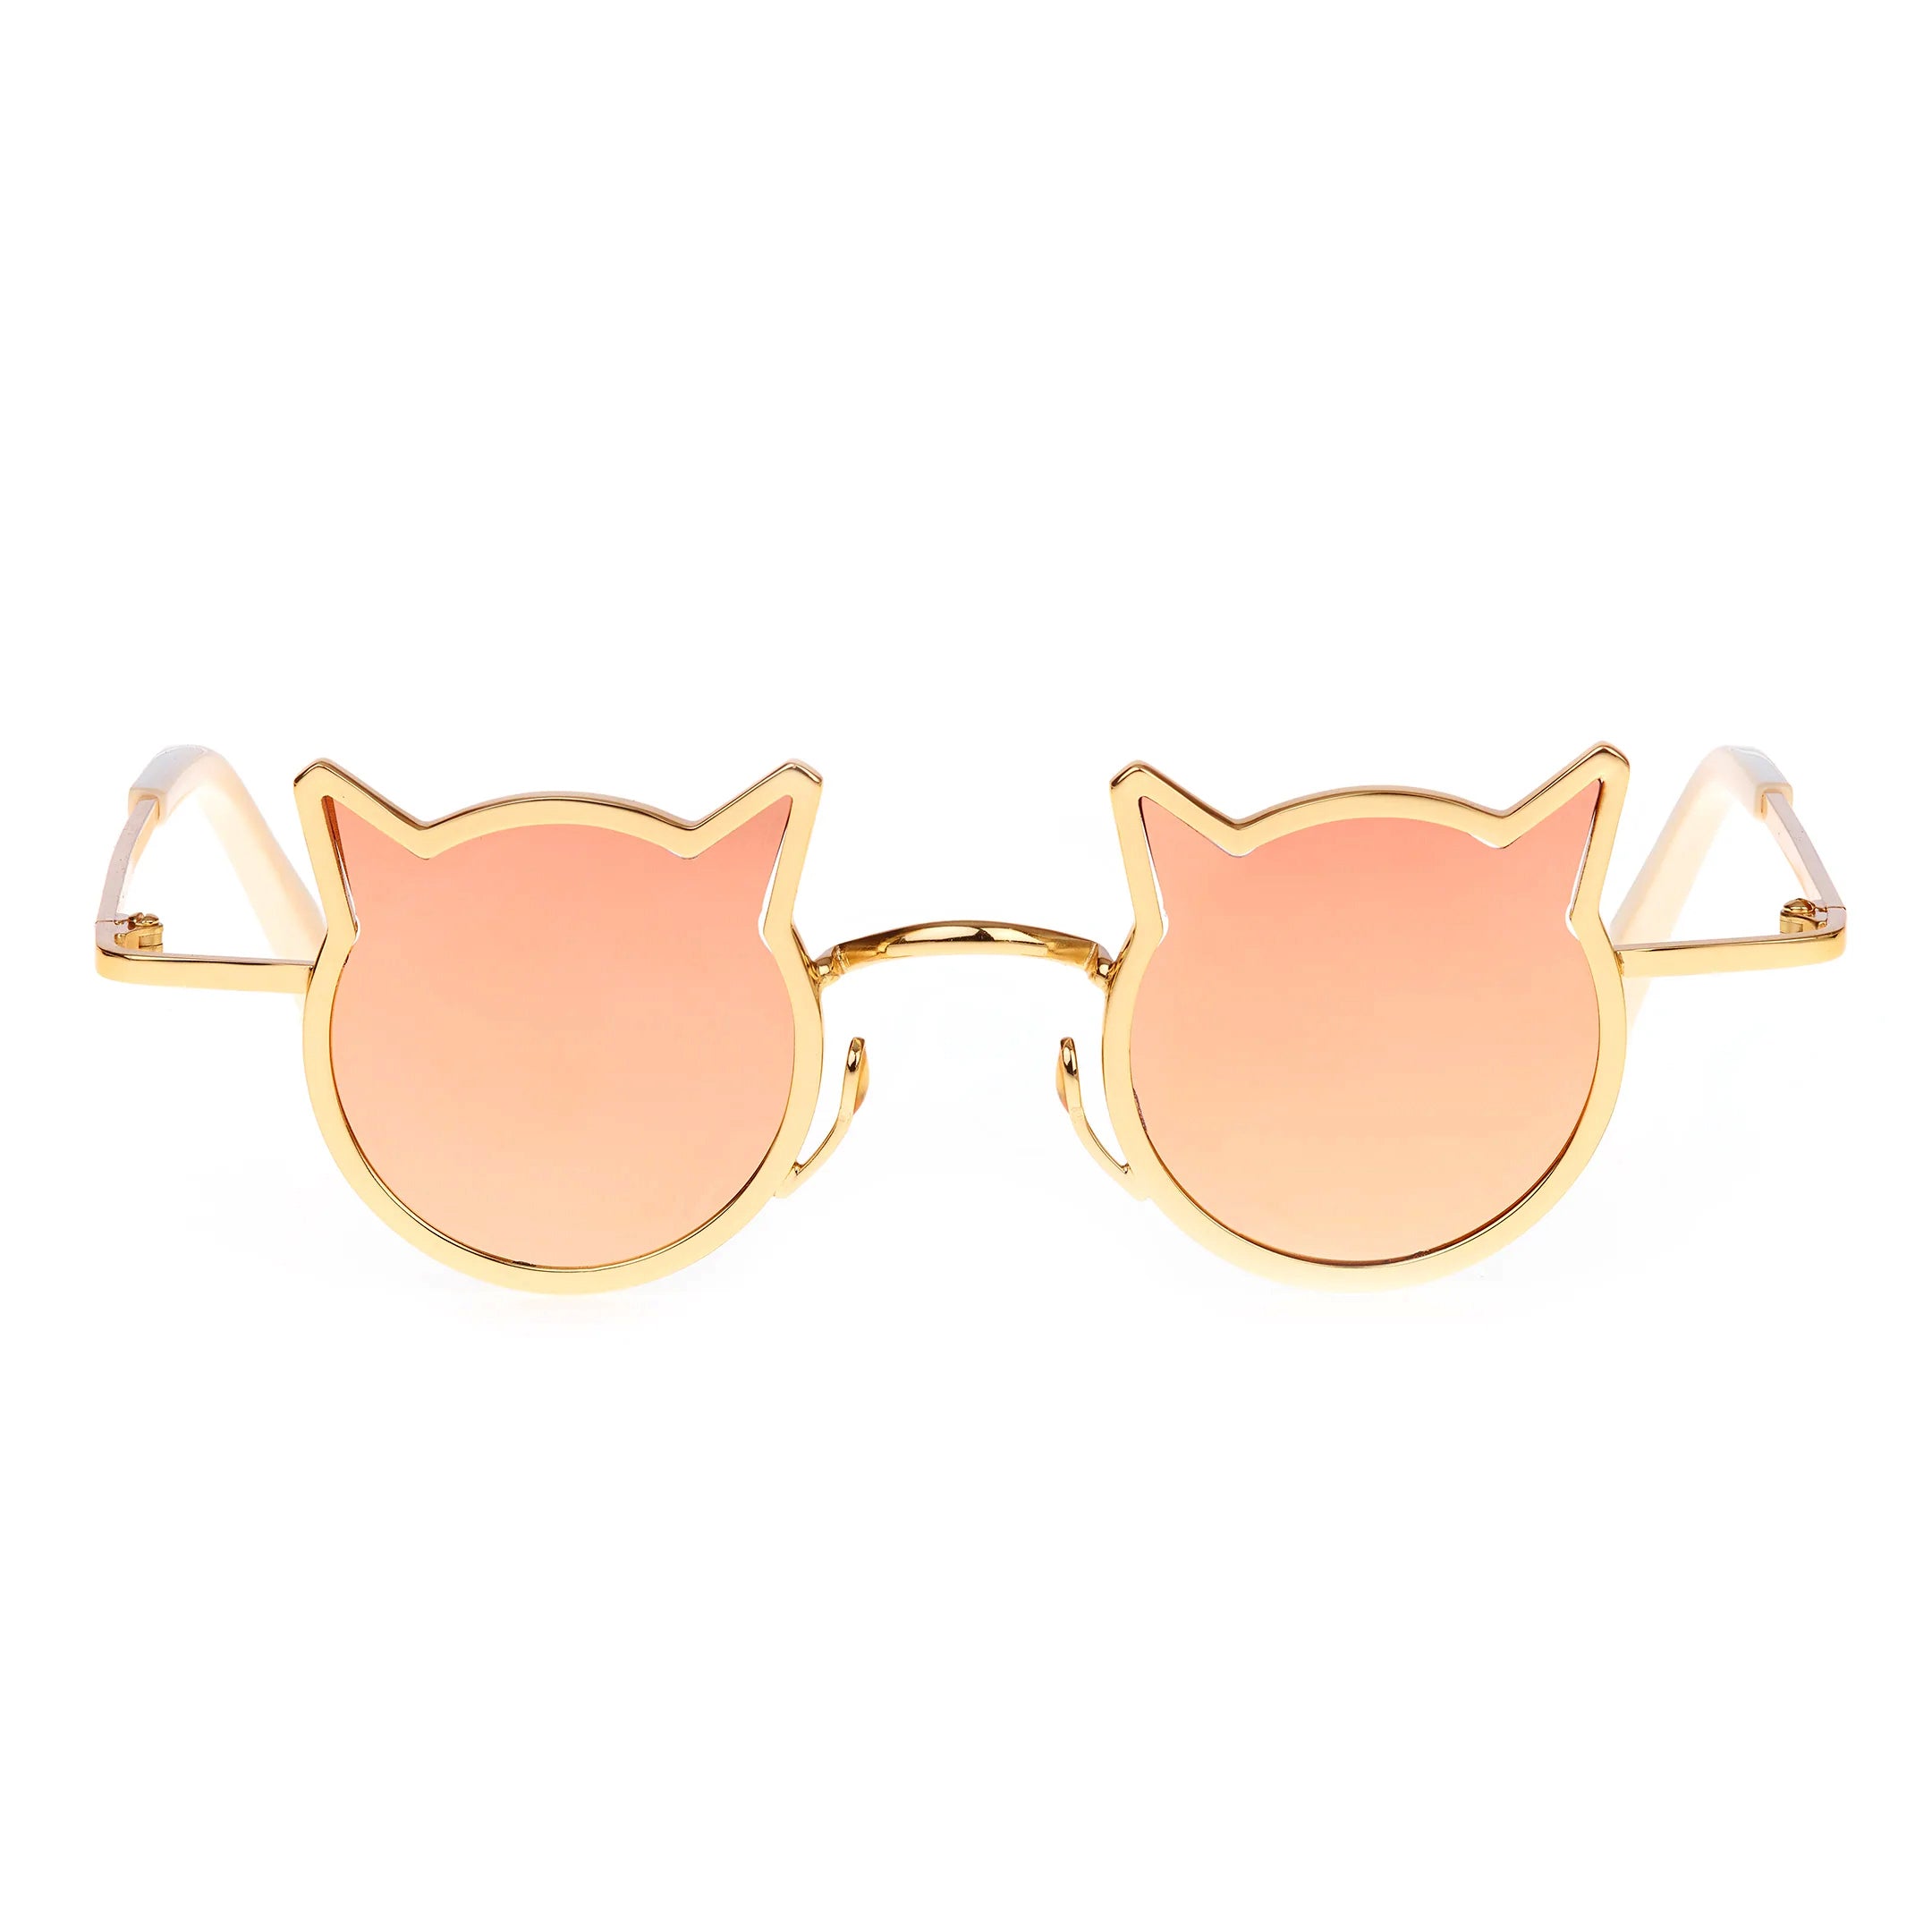 COOL CAT IN 18K GOLD PLATED